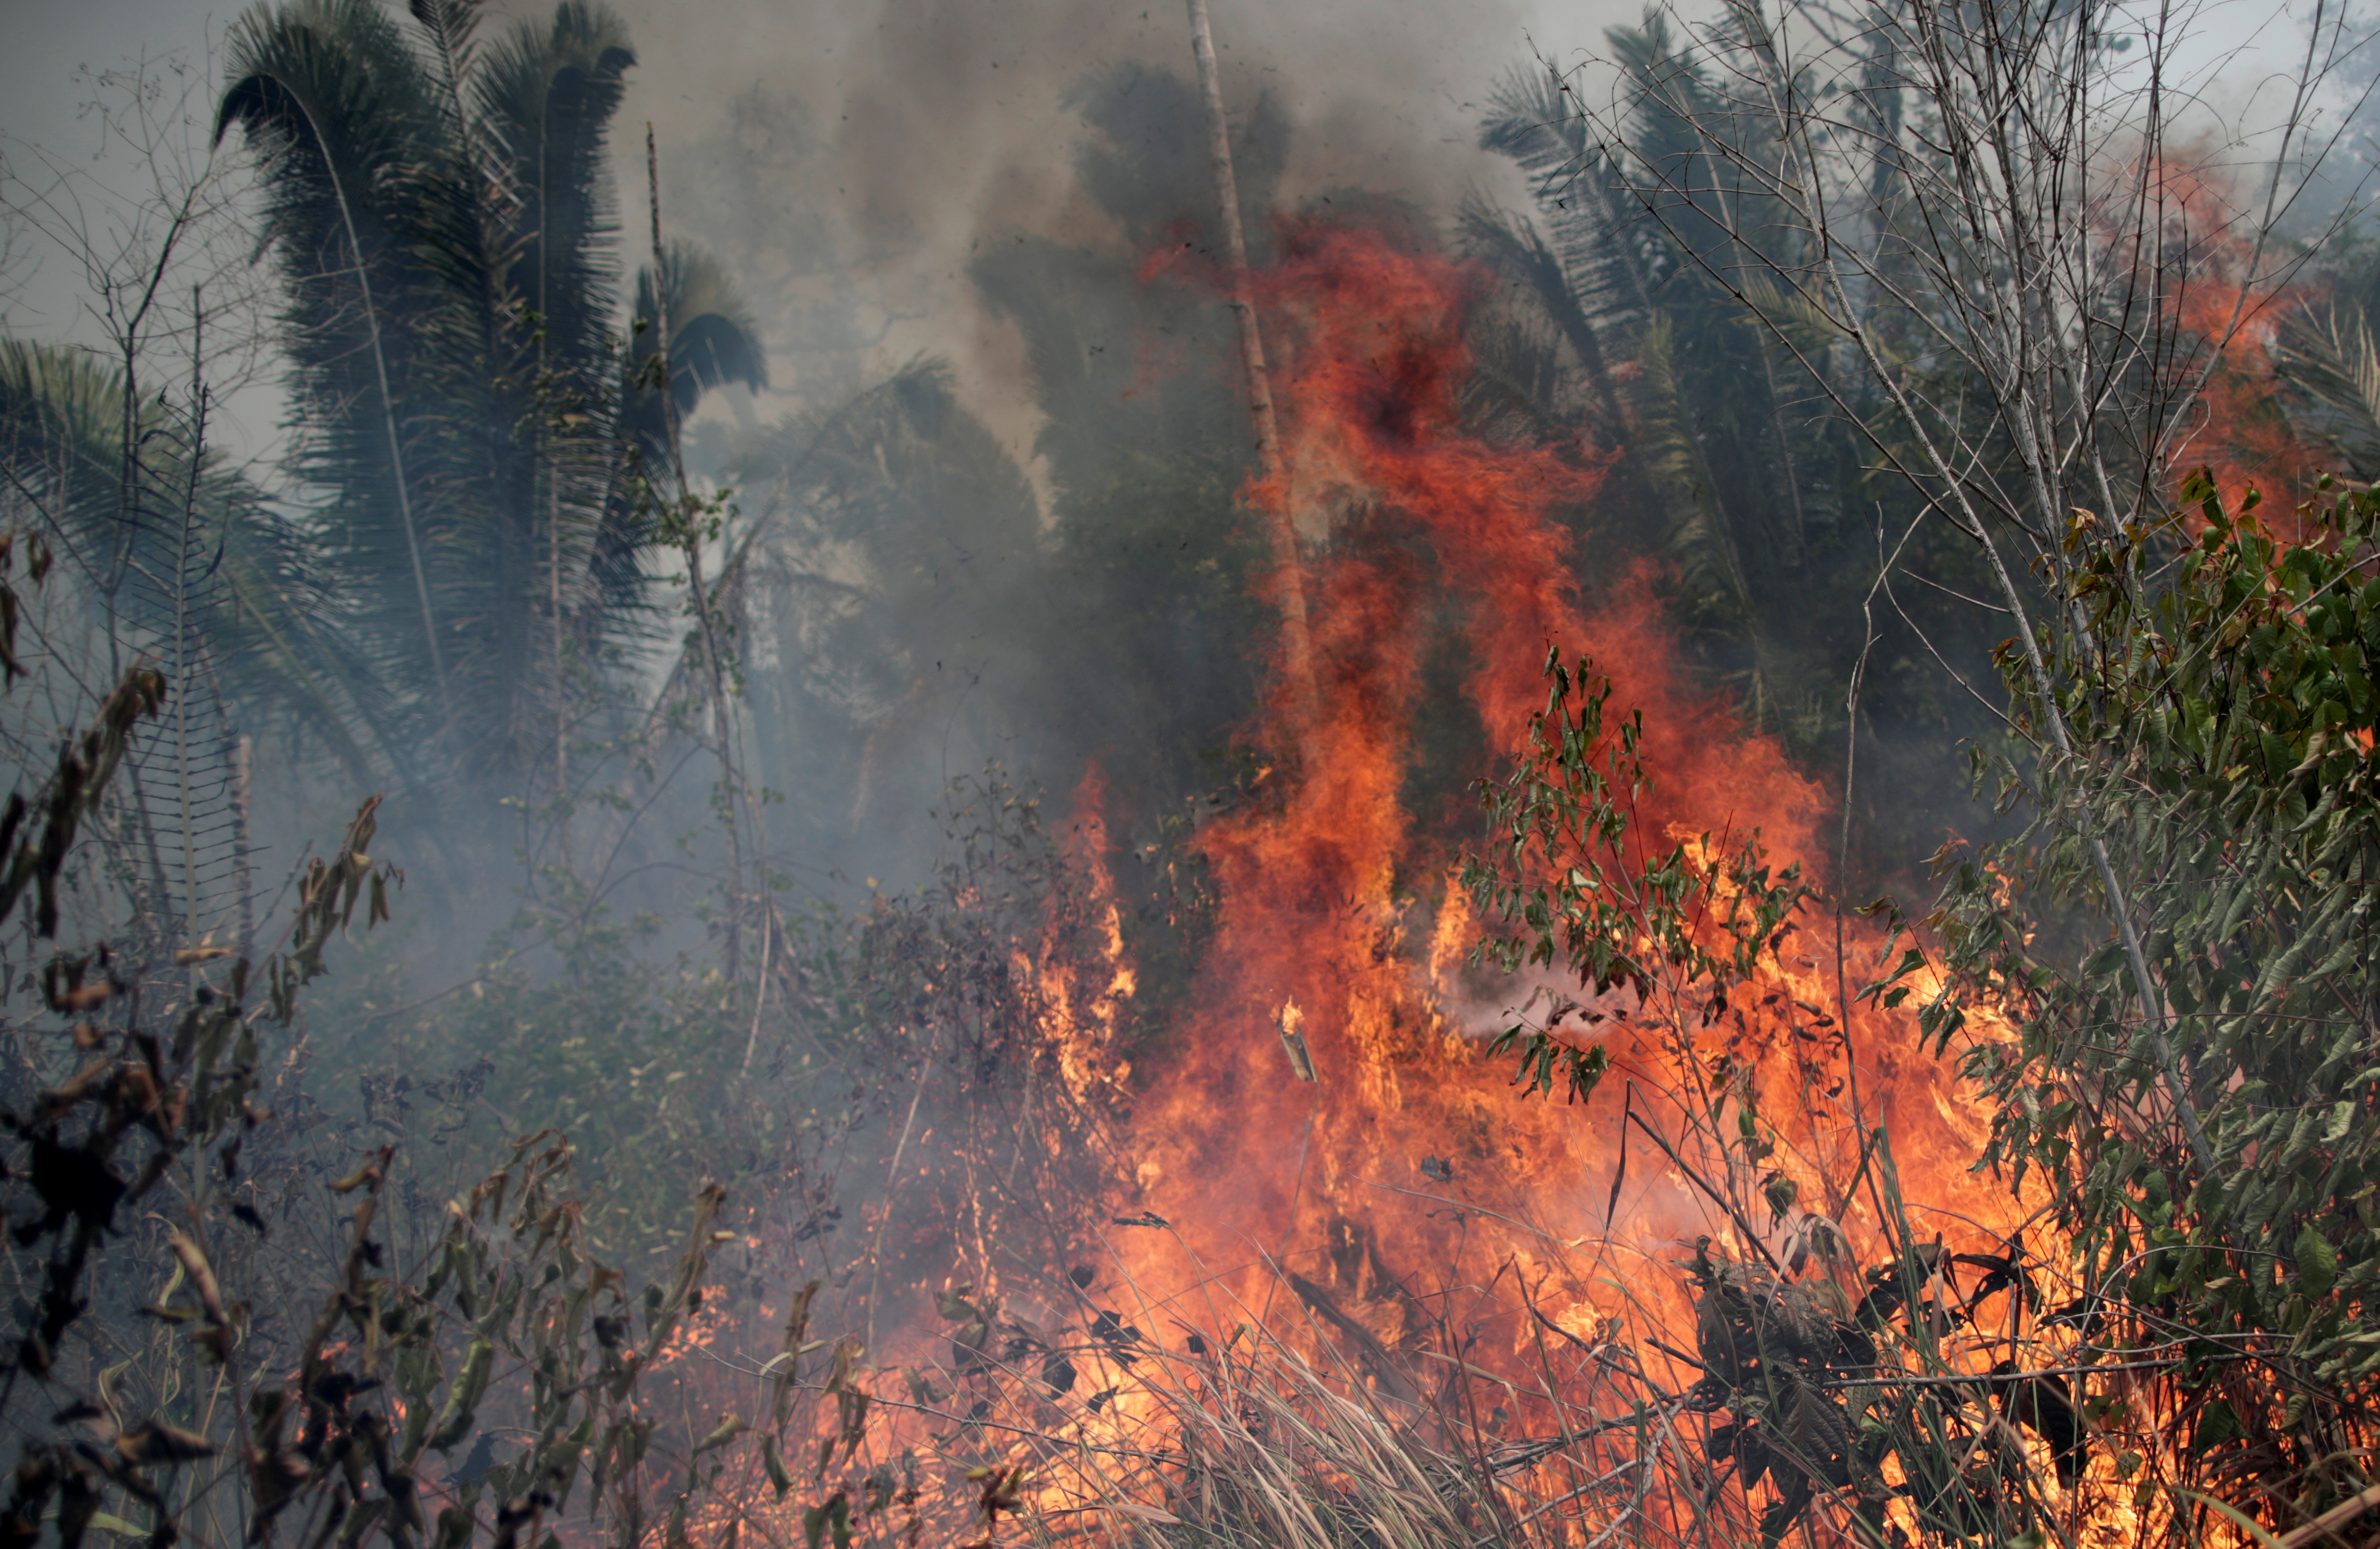 A tract of the Amazon jungle burns as it is cleared by loggers and farmers in Porto Velho, Brazil August 24, 2019.